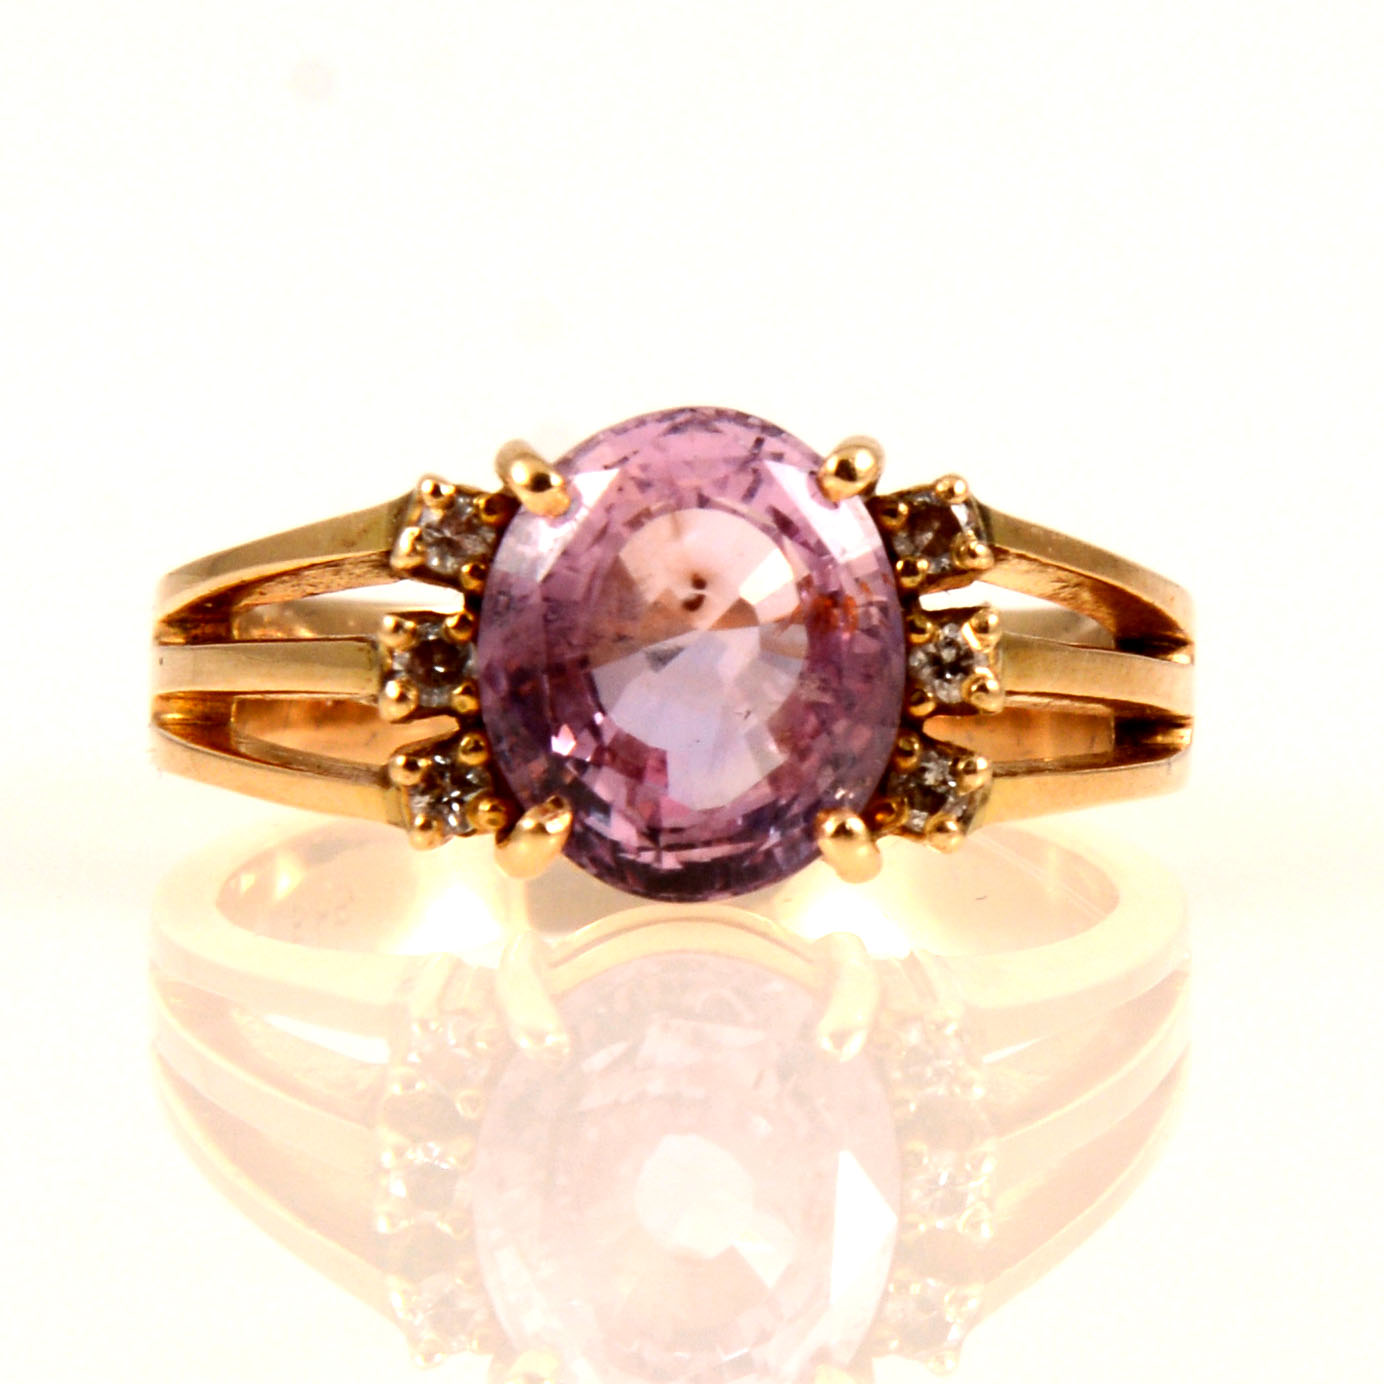 A synthetic pink sapphire and diamond ring.